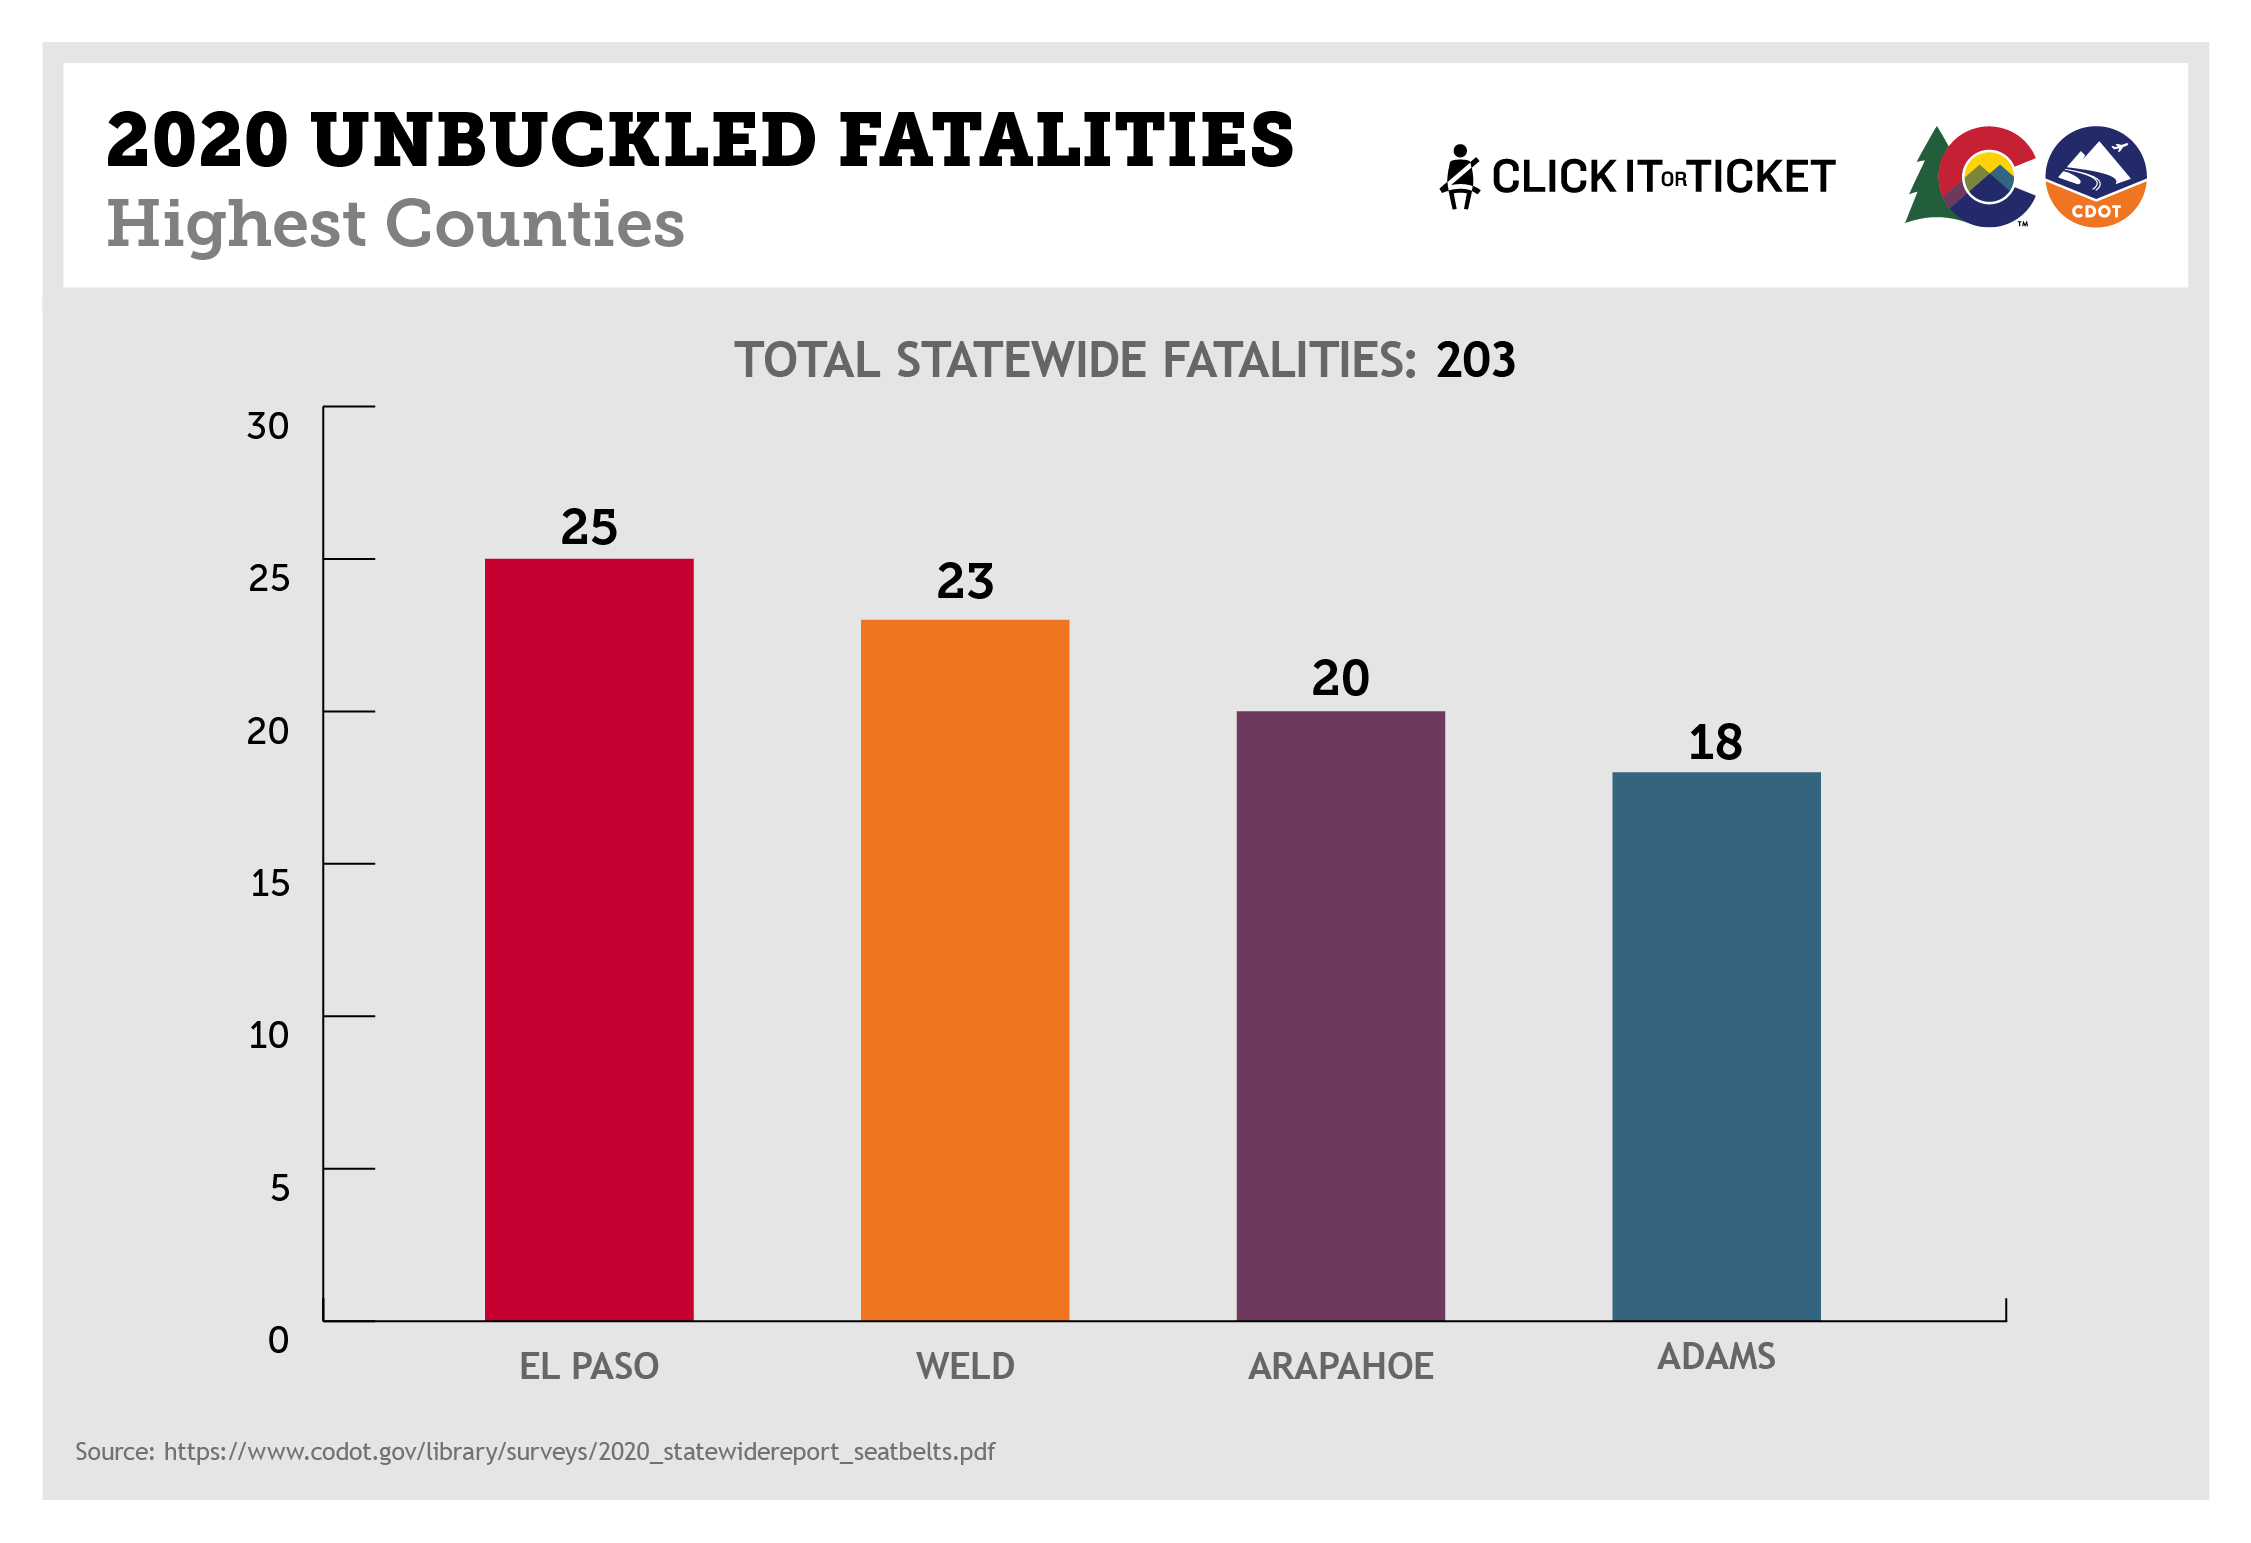 2020 Unbuckled Fatalities - Highest Counties detail image